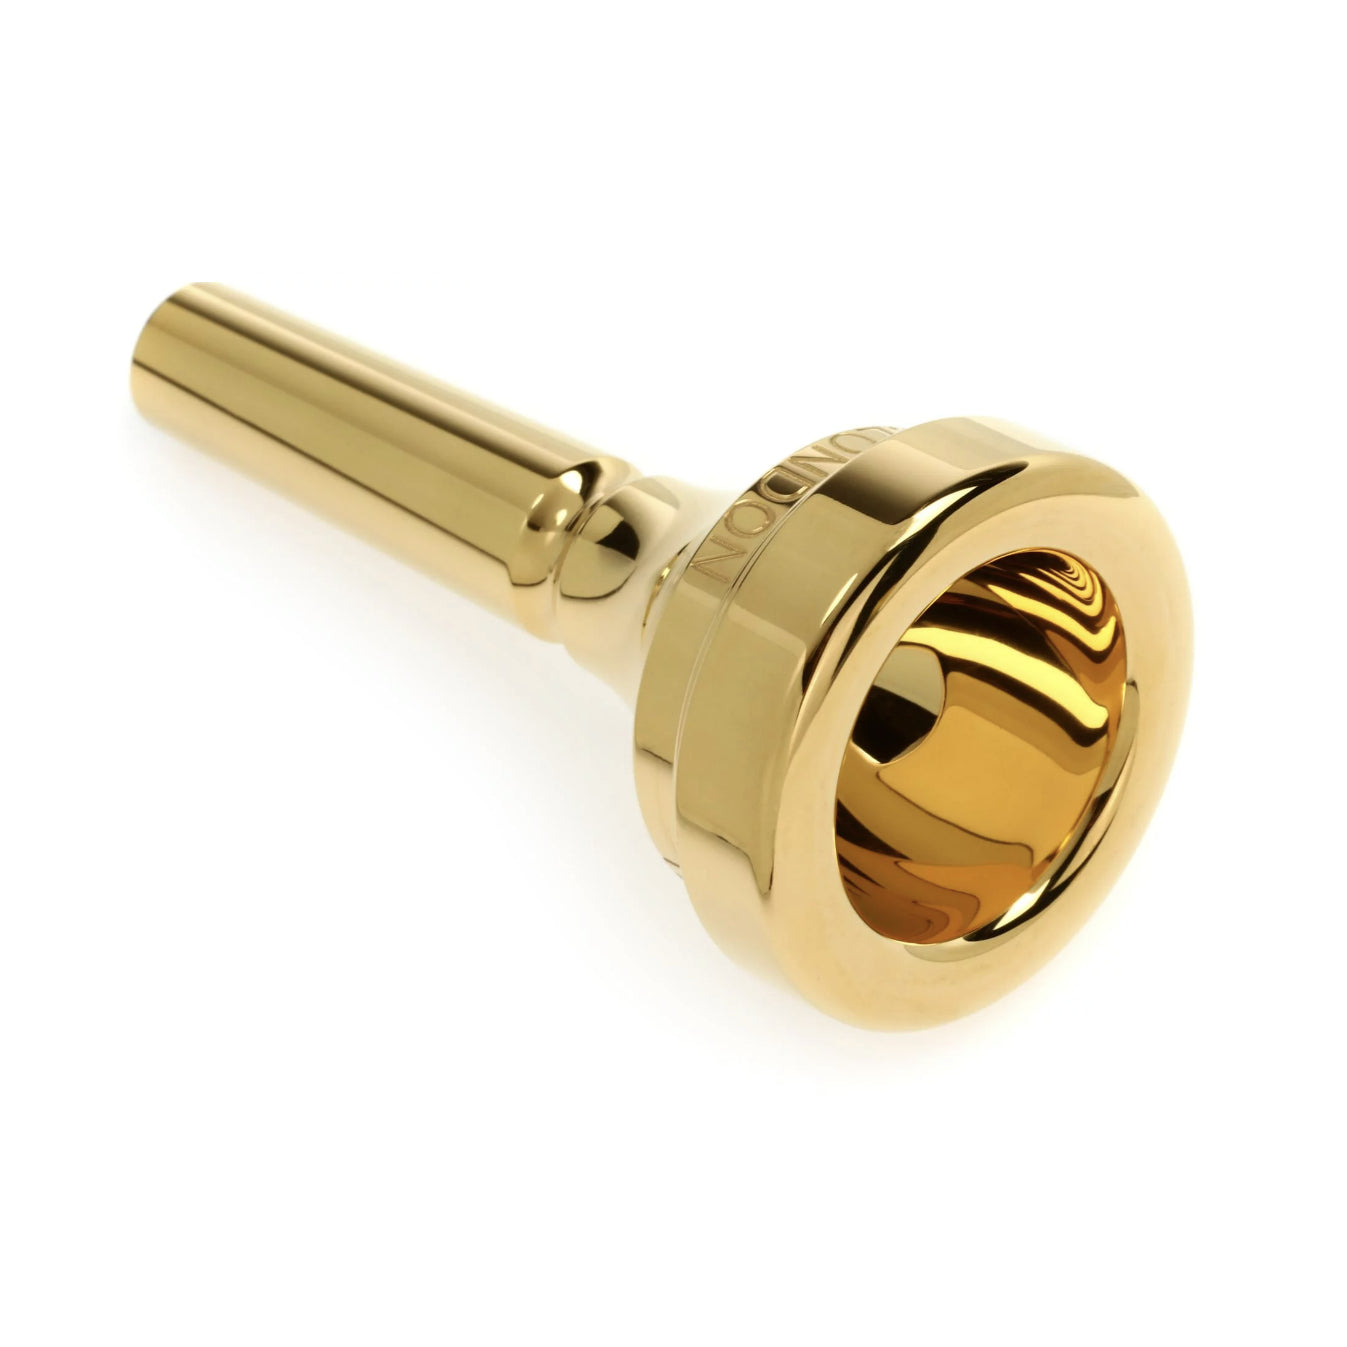 Denis Wick Model DW4880-4BL Classic 4BL Trombone Mouthpiece in Gold Pl –  The Mighty Quinn Brass and Winds